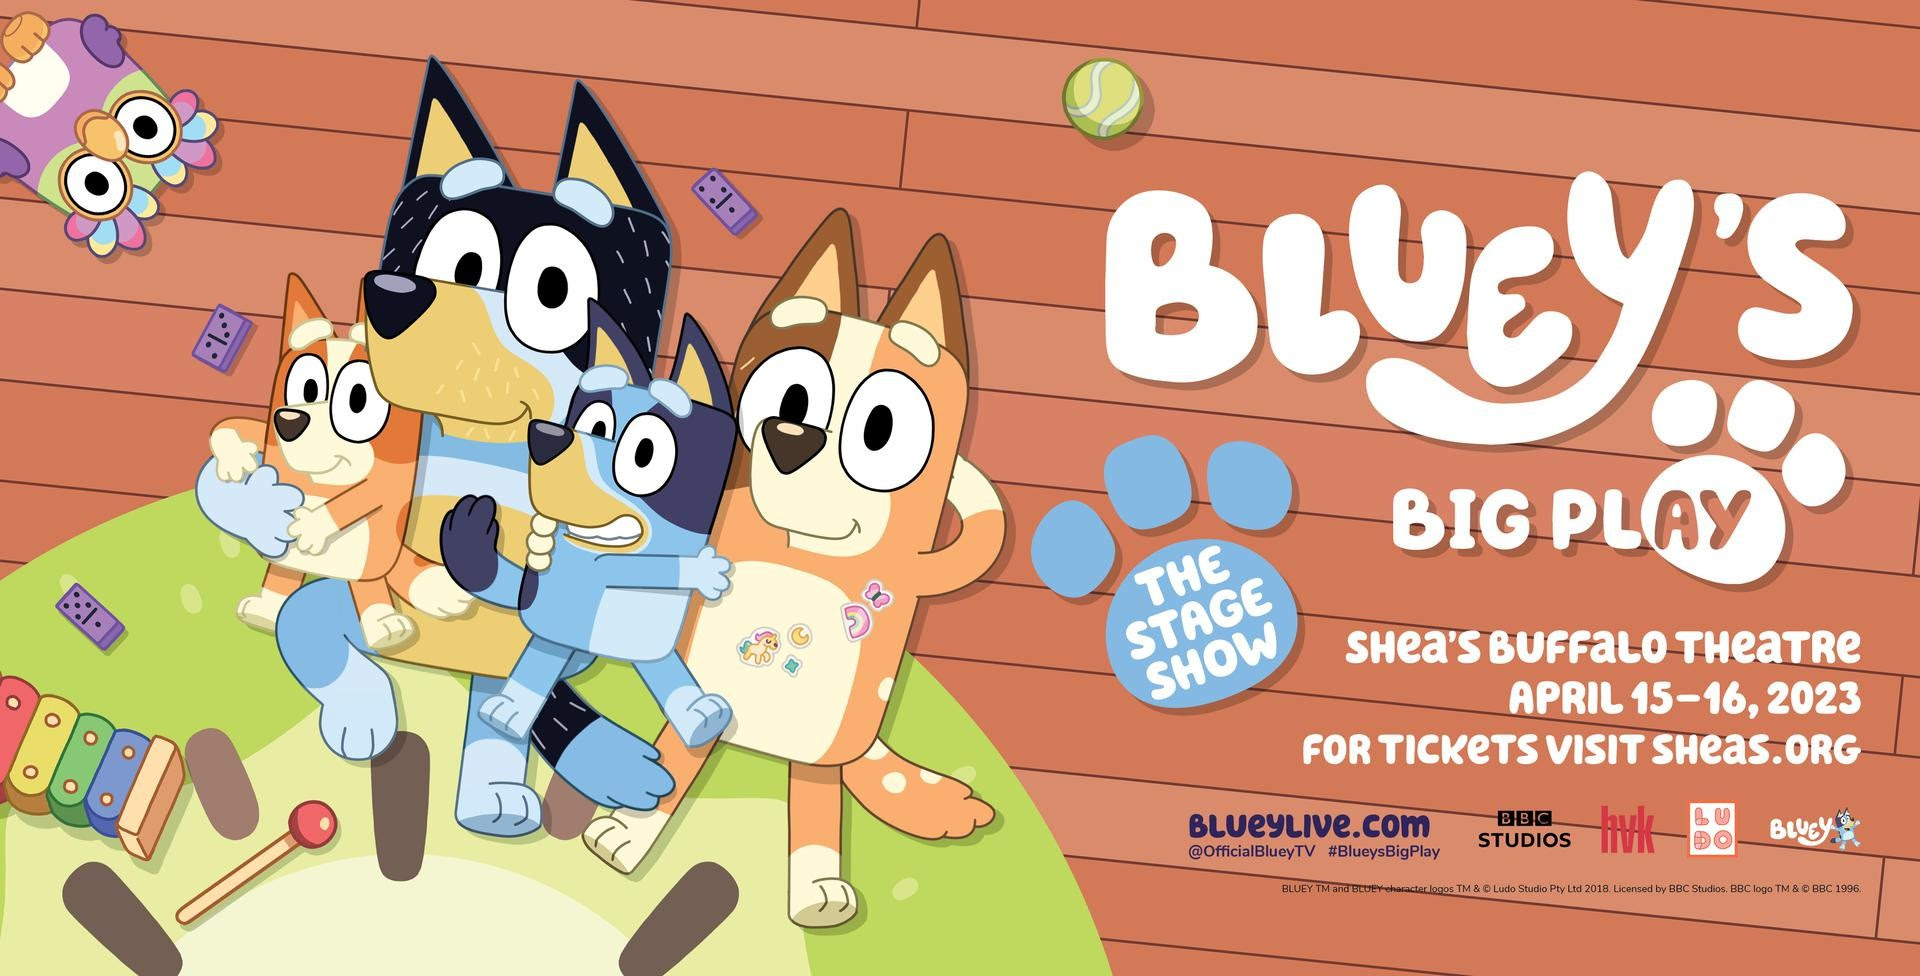 `Bluey's Big Play The Stage Show` image courtesy of Shea's Performing Arts Center